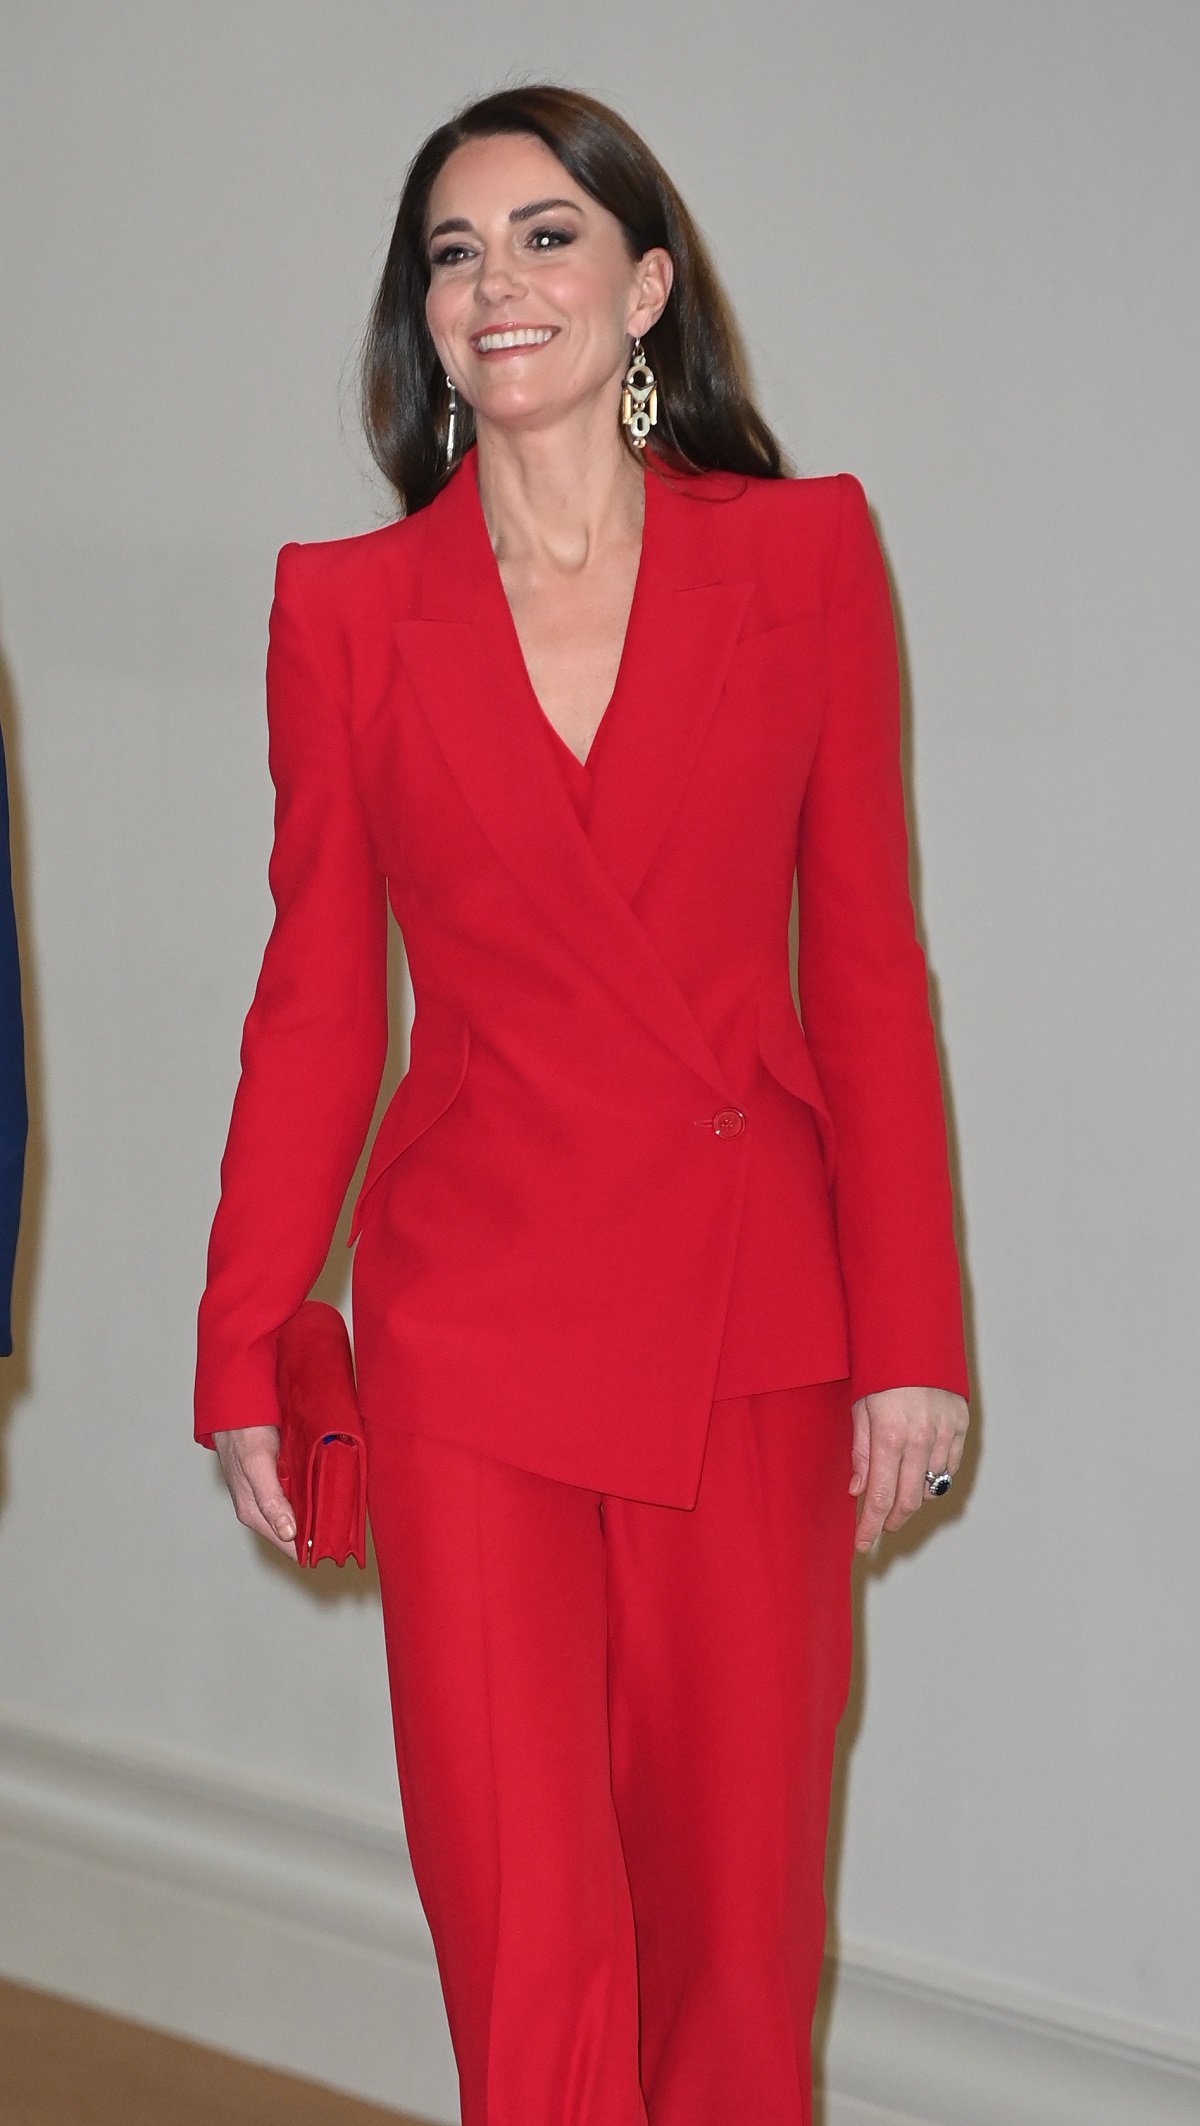 Kate Middleton wearing a red power suits to a pre-campaign launch event, hosted by The Royal Foundation Centre for Early Childhood